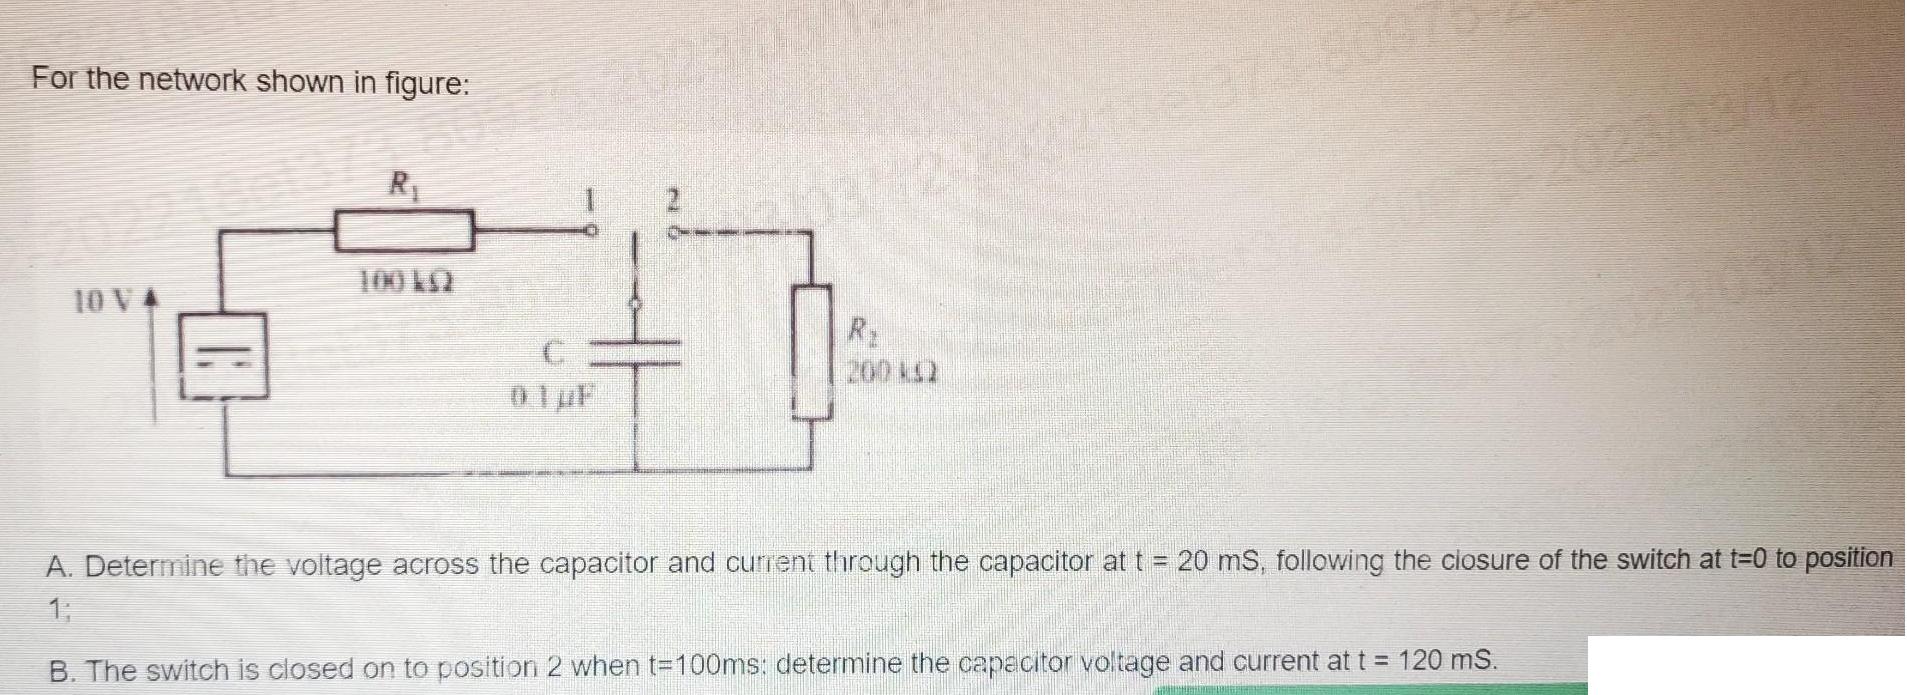 For the network shown in figure: 10 V4 R 100 ks2 C R. 200442 A. Determine the voltage across the capacitor